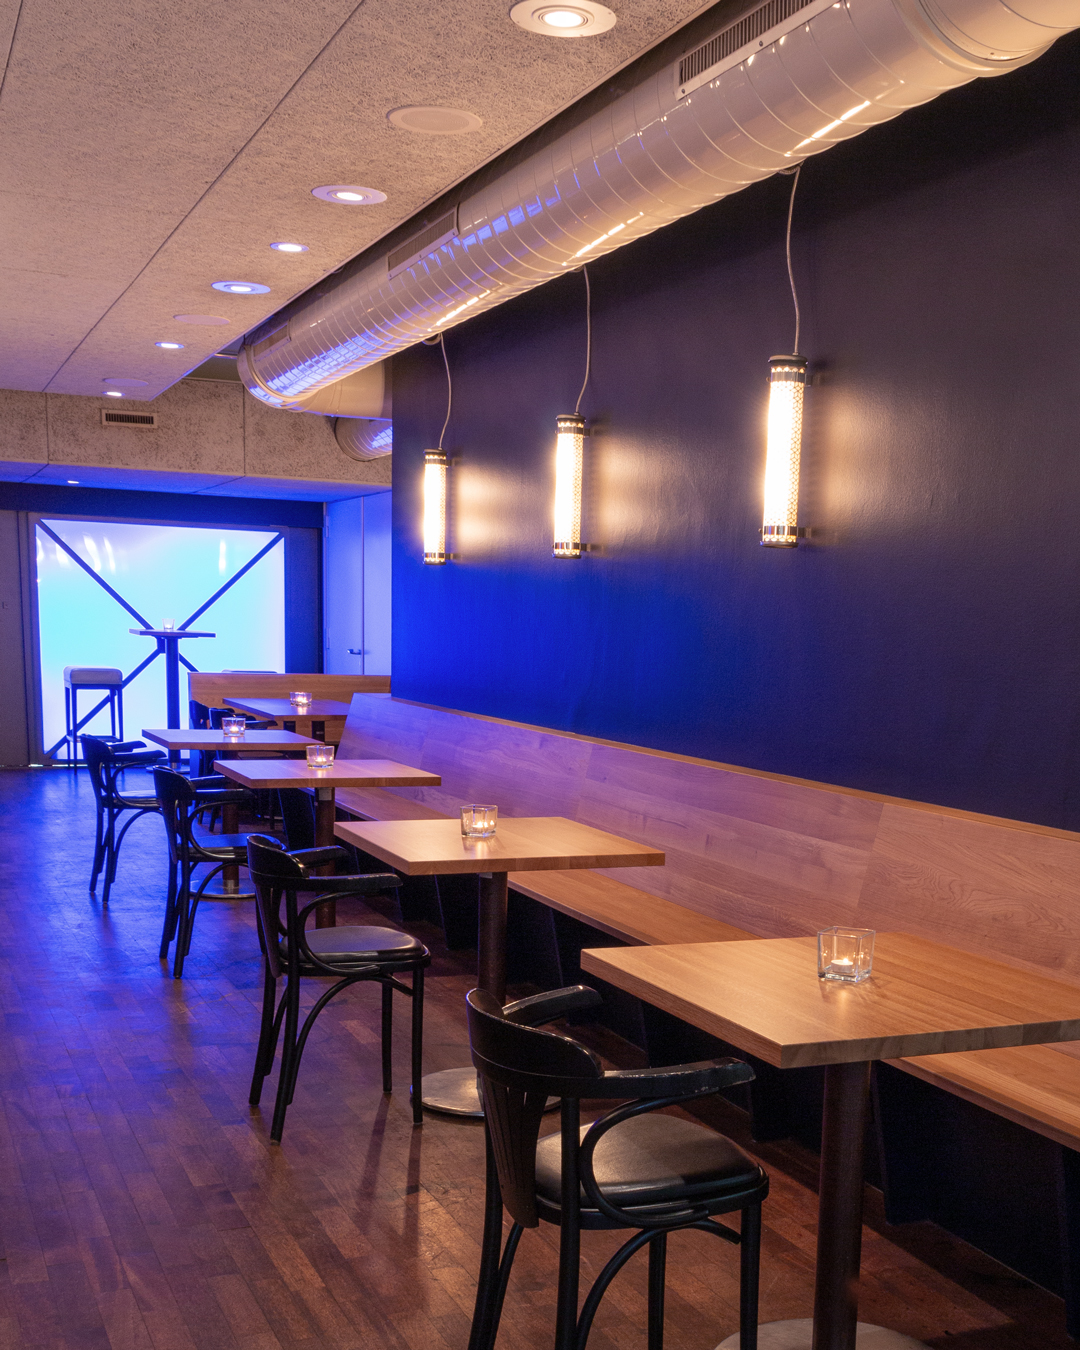 Rental room for private events, Blaue Ente Bar in the Kreis 8